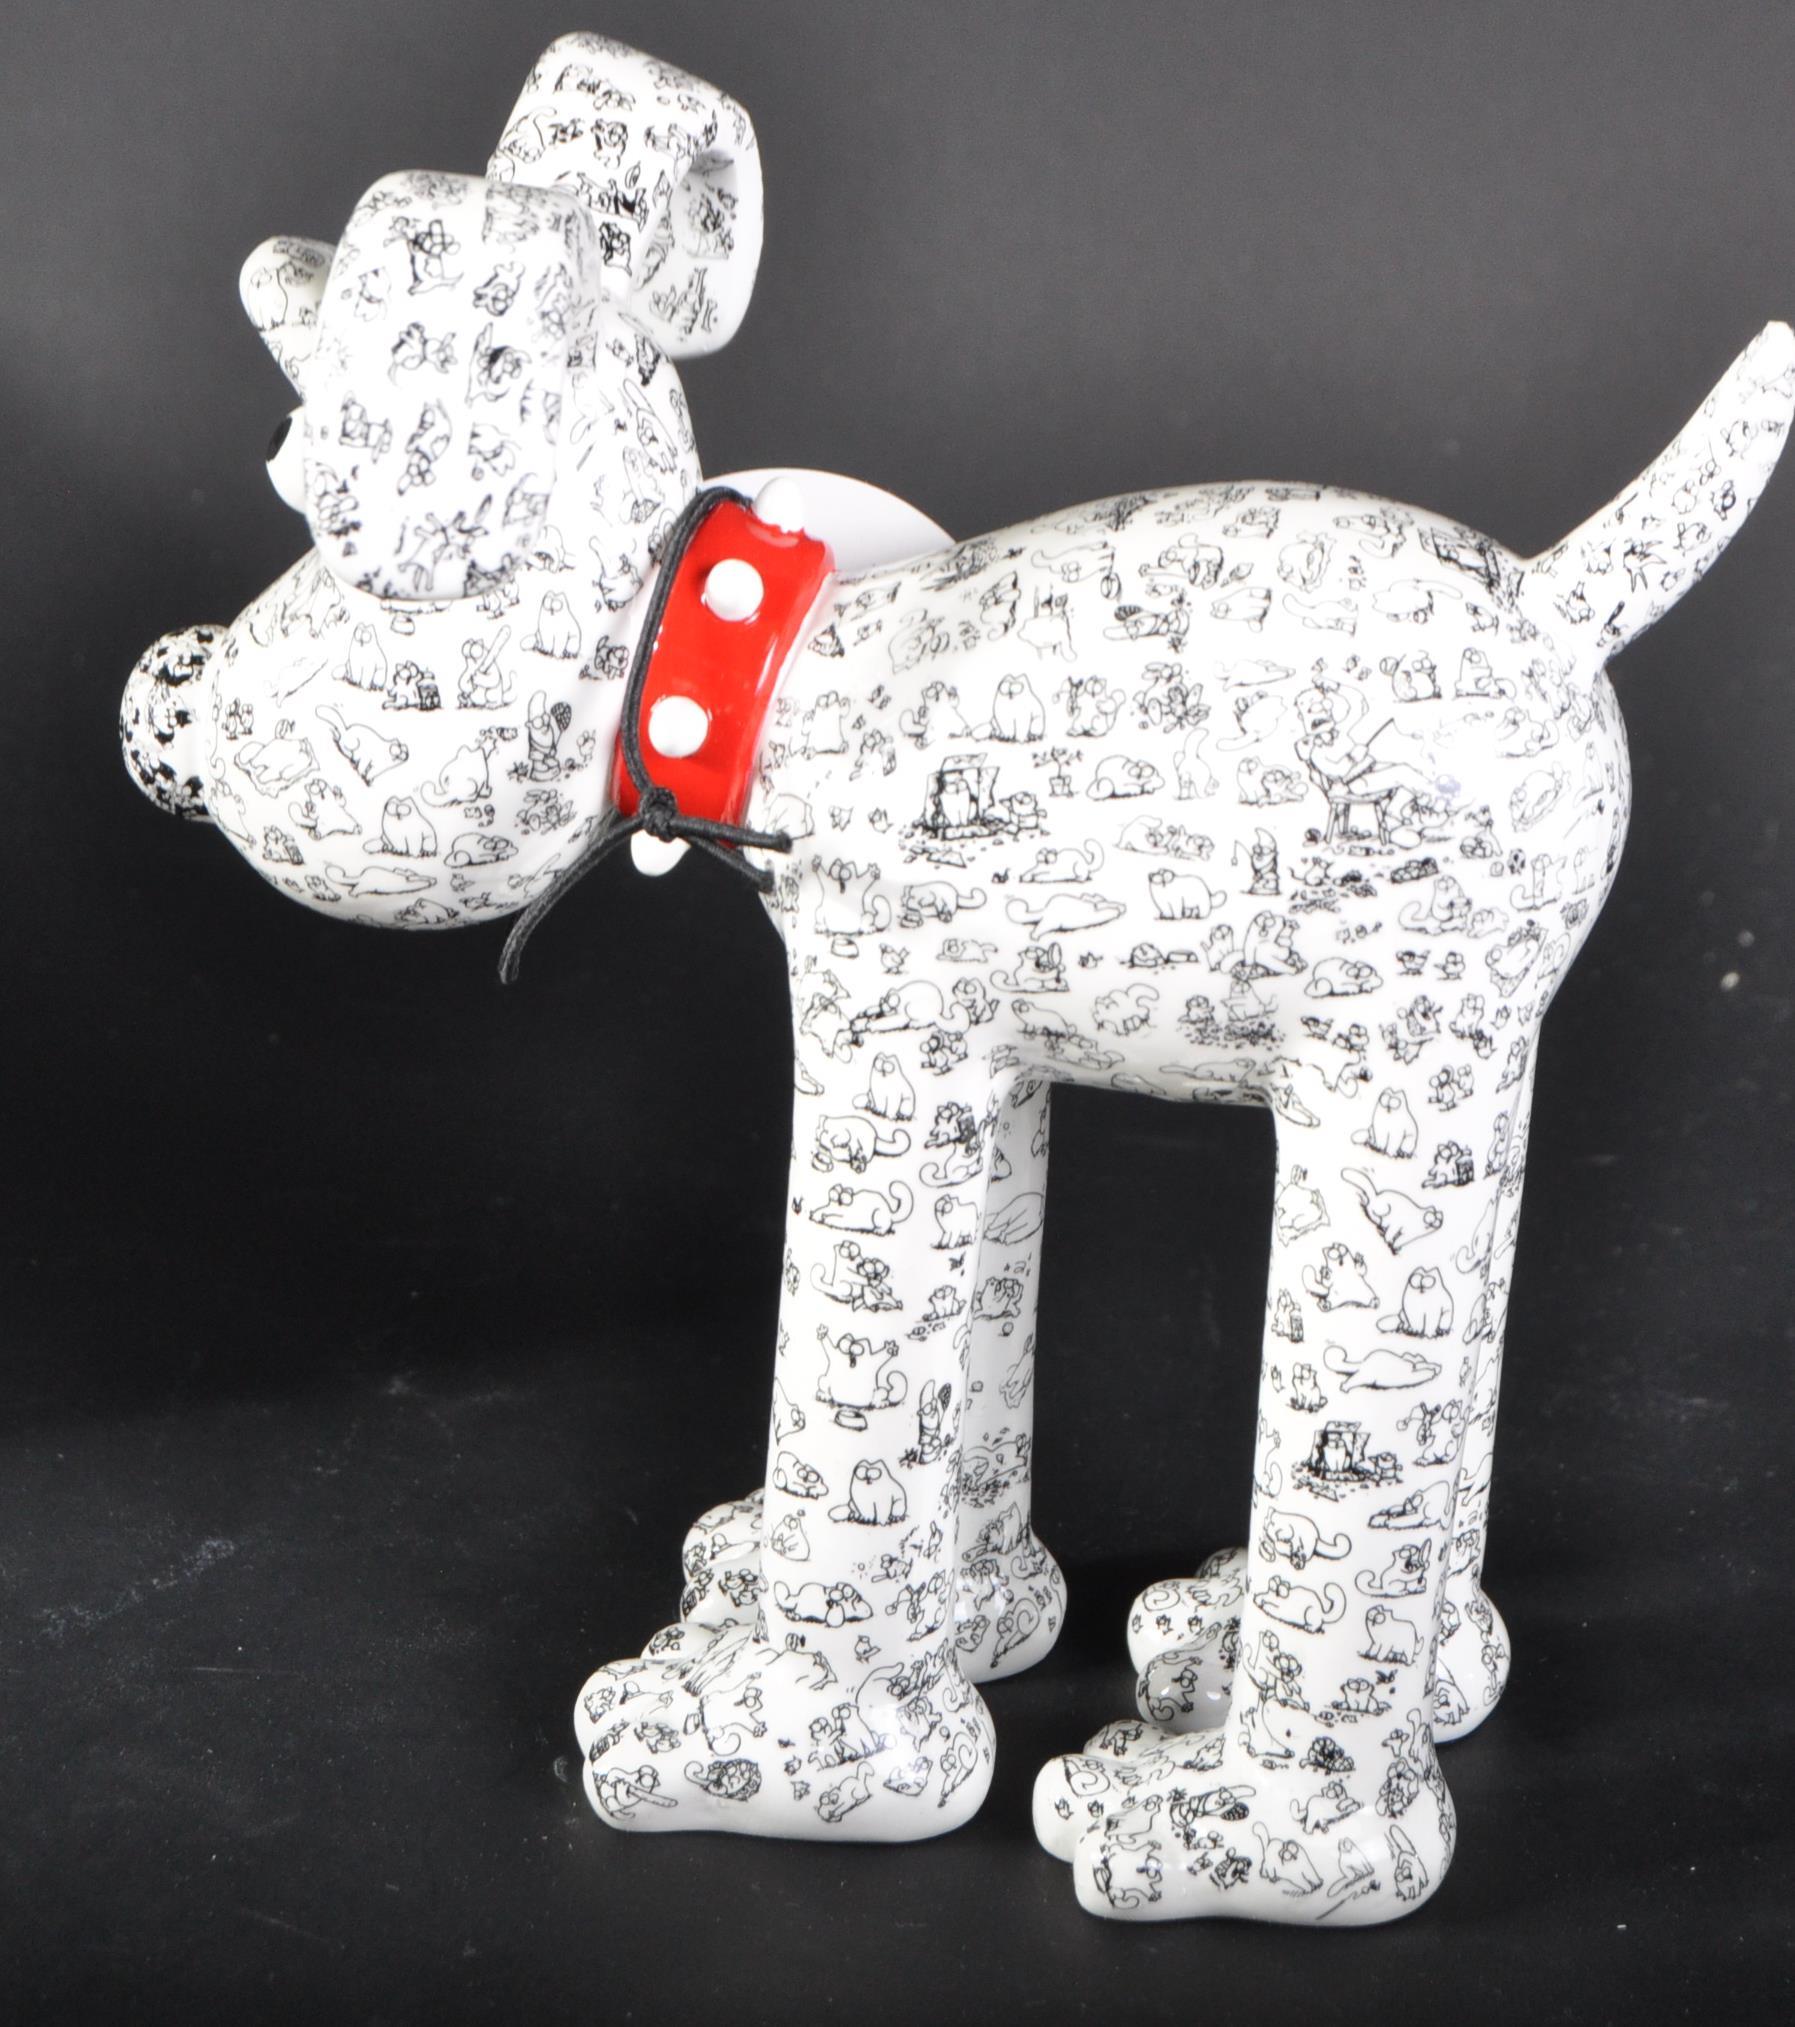 WALLACE & GROMIT - GROMIT UNLEASHED COLLECTABLE FIGURINE - Image 3 of 6